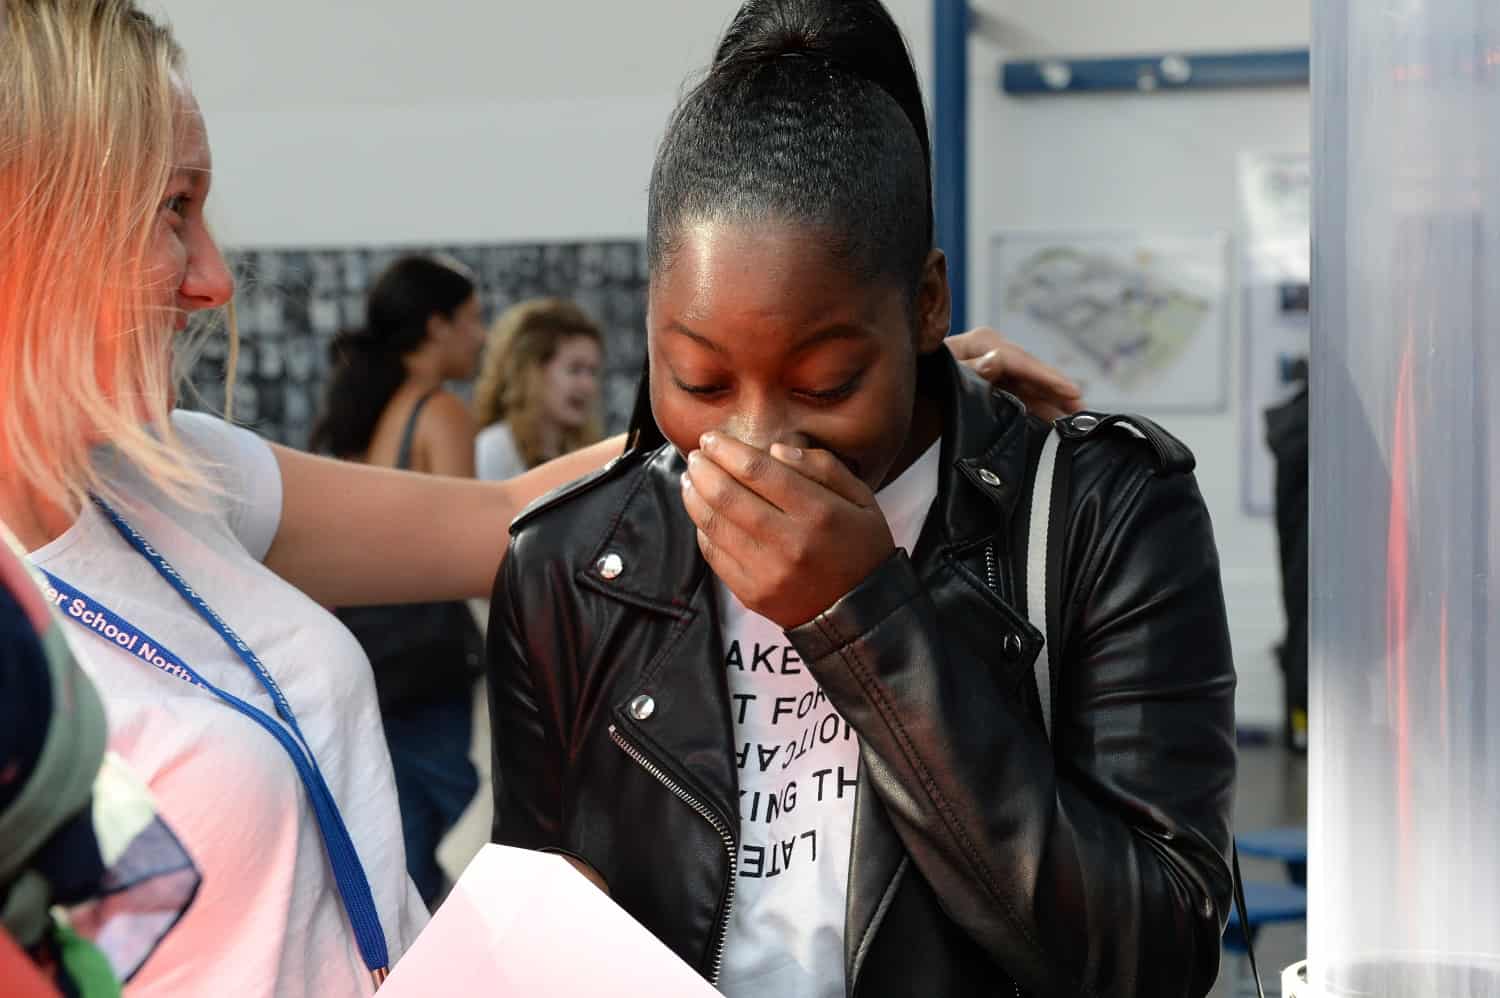 The Charter School North Dulwich. A Level results 15 Aug 19.
Photo: Tom Parkes